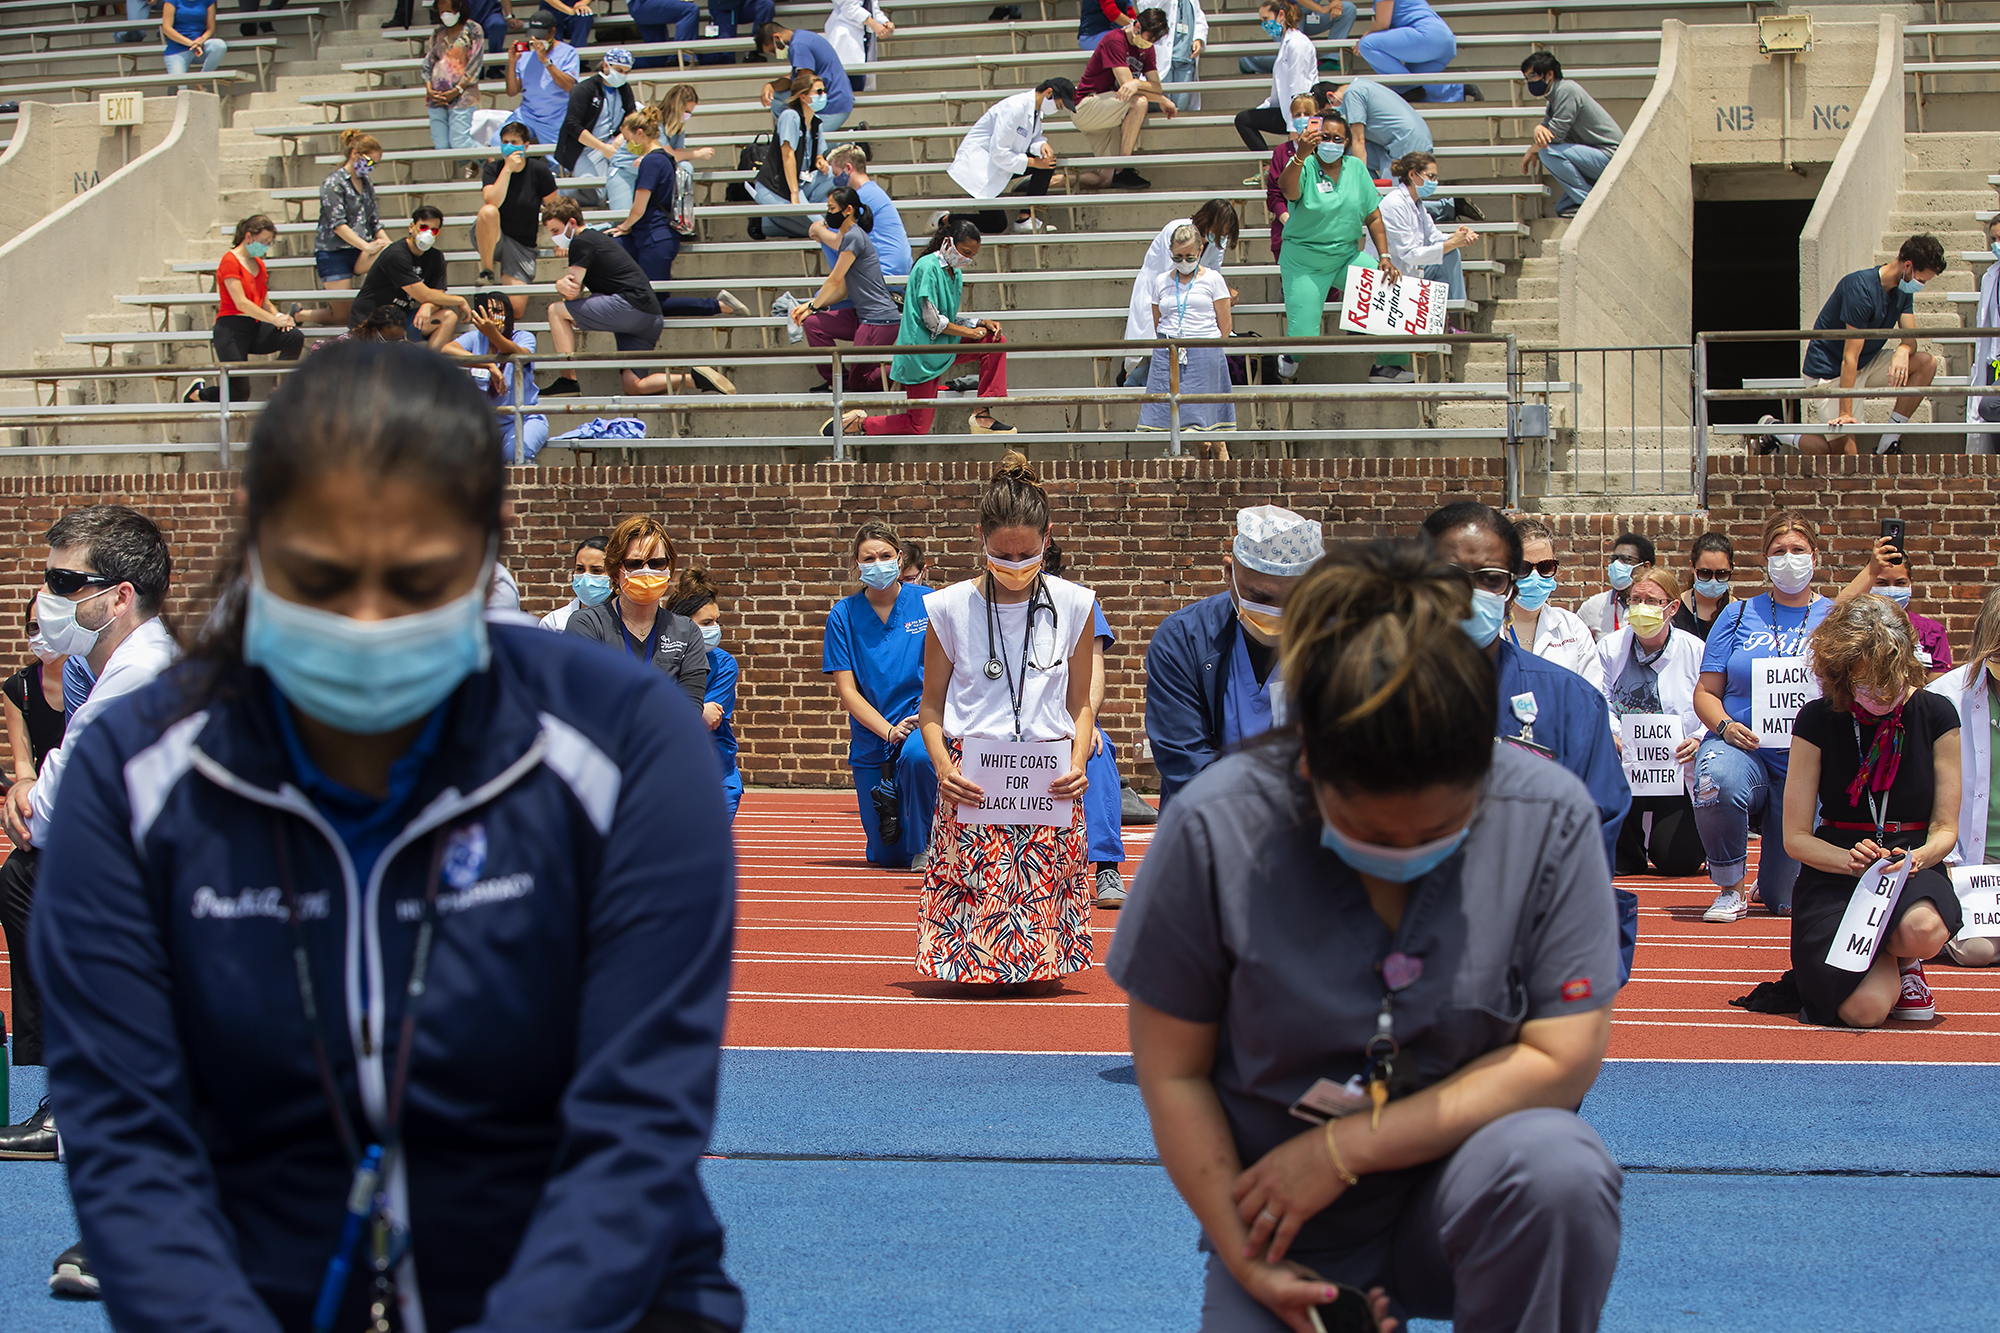 Penn Medicine workers in scrubs and protective face masks kneel on Franklin Field, one holds a sign that reads White Coats for Black Lives